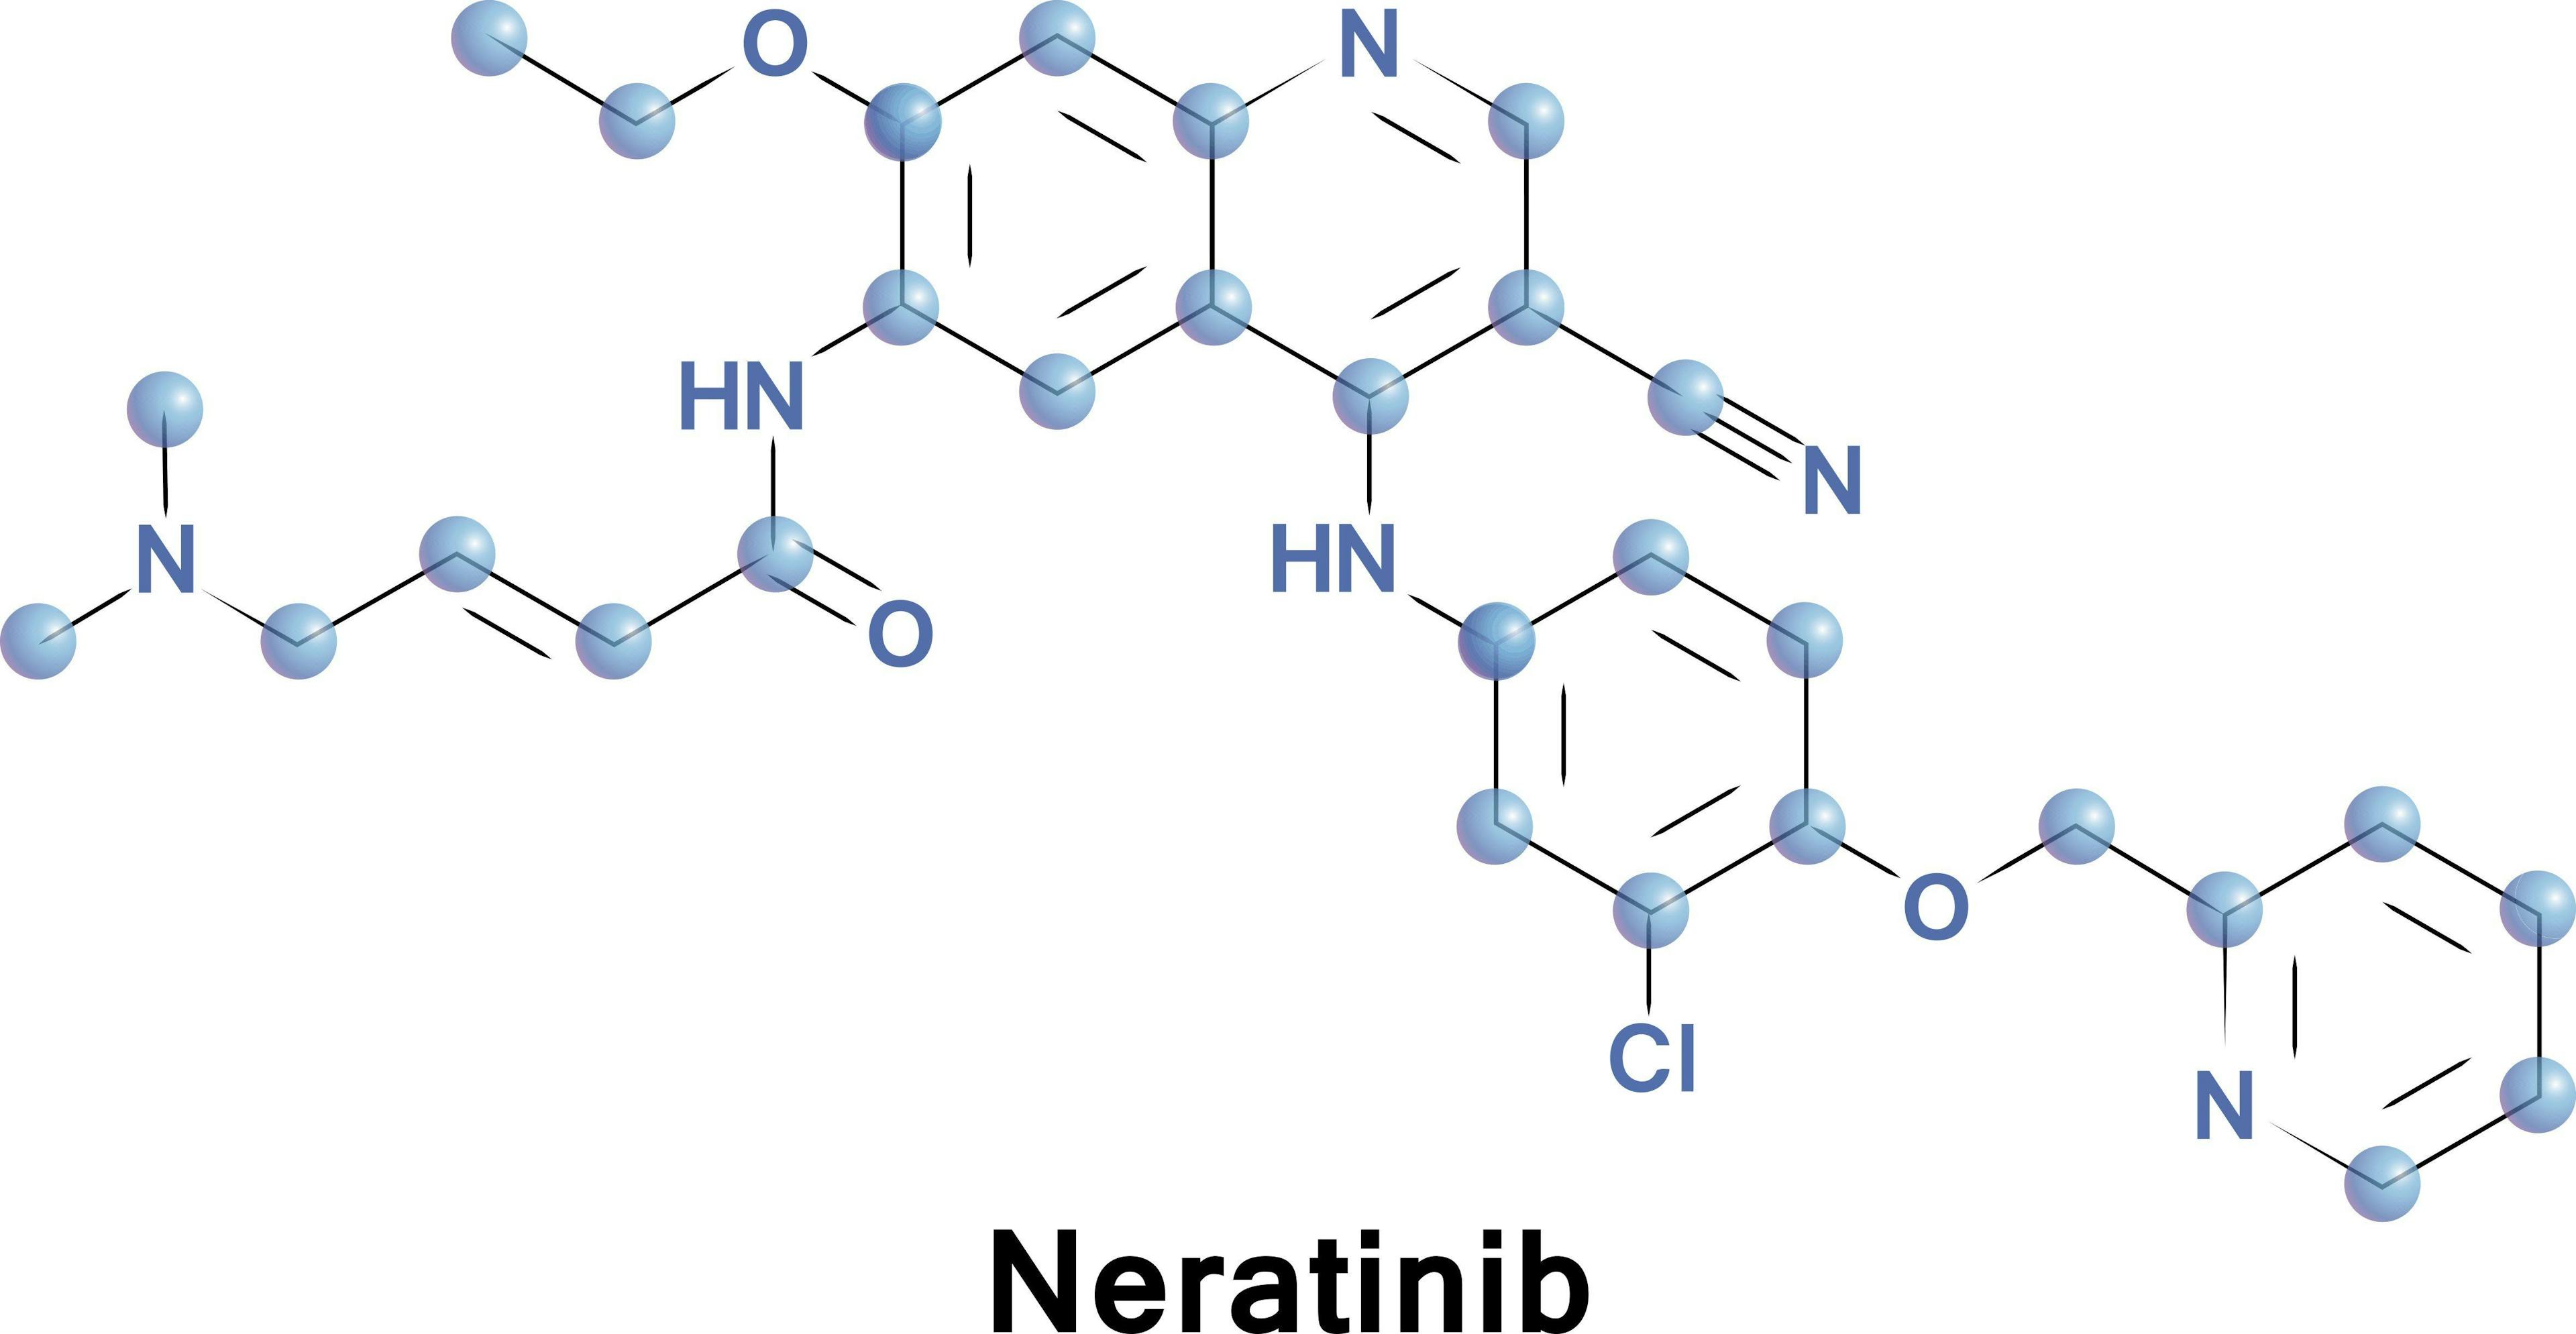 Considerations When Initiating Neratinib for Breast Cancer: How to Prevent and Treat Diarrhea